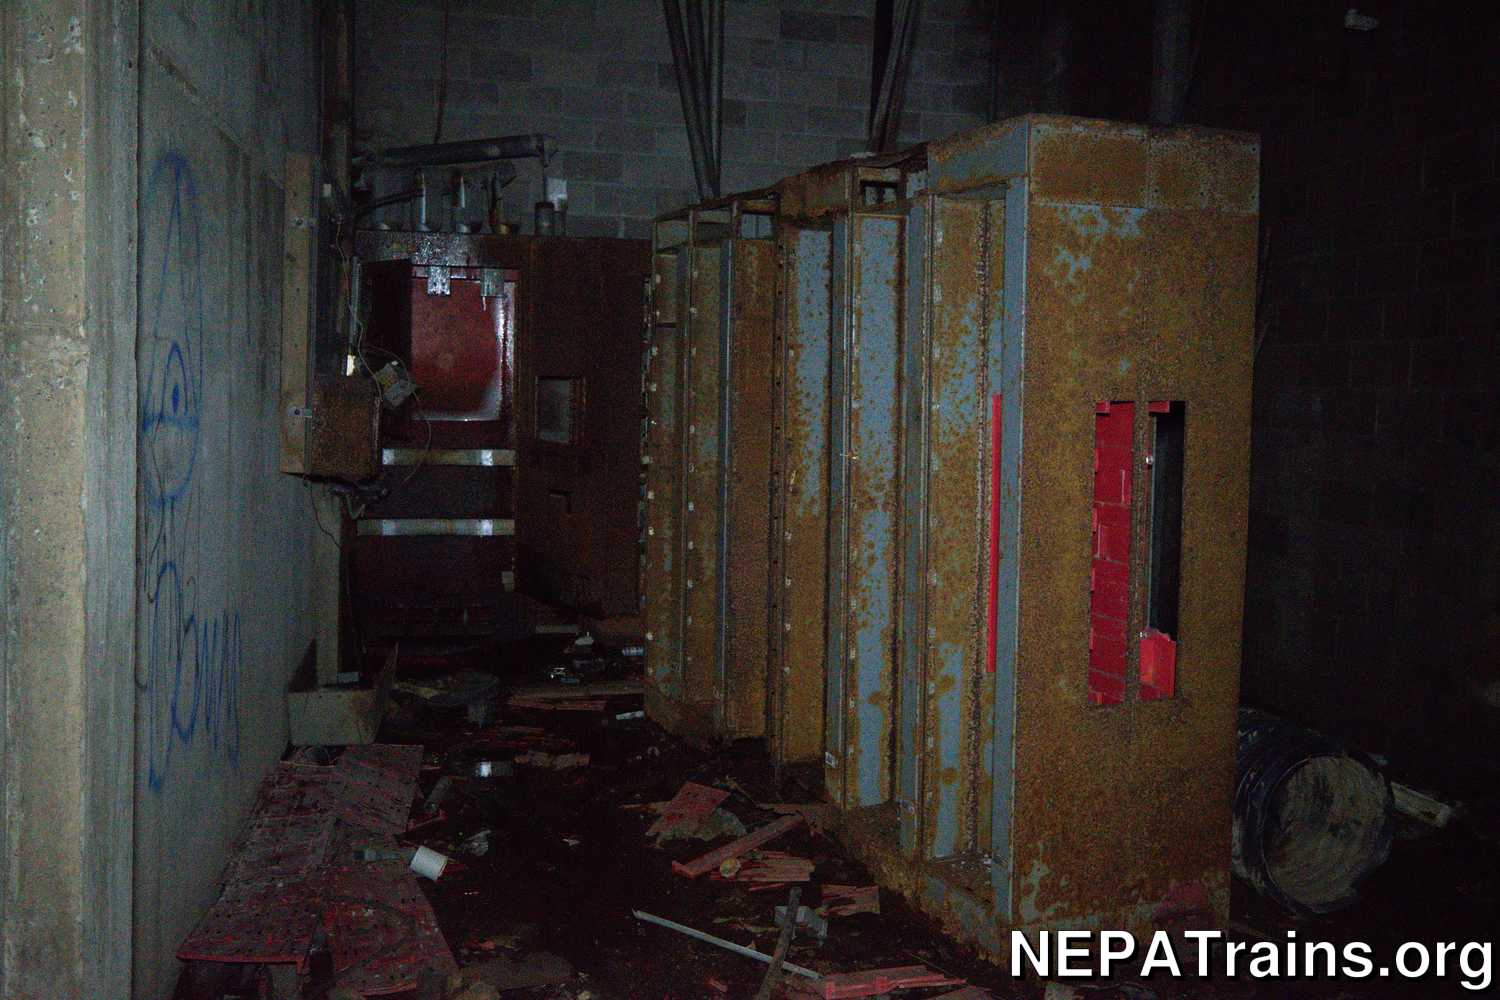 Slaughterhouse 5150 Electrical Equipment